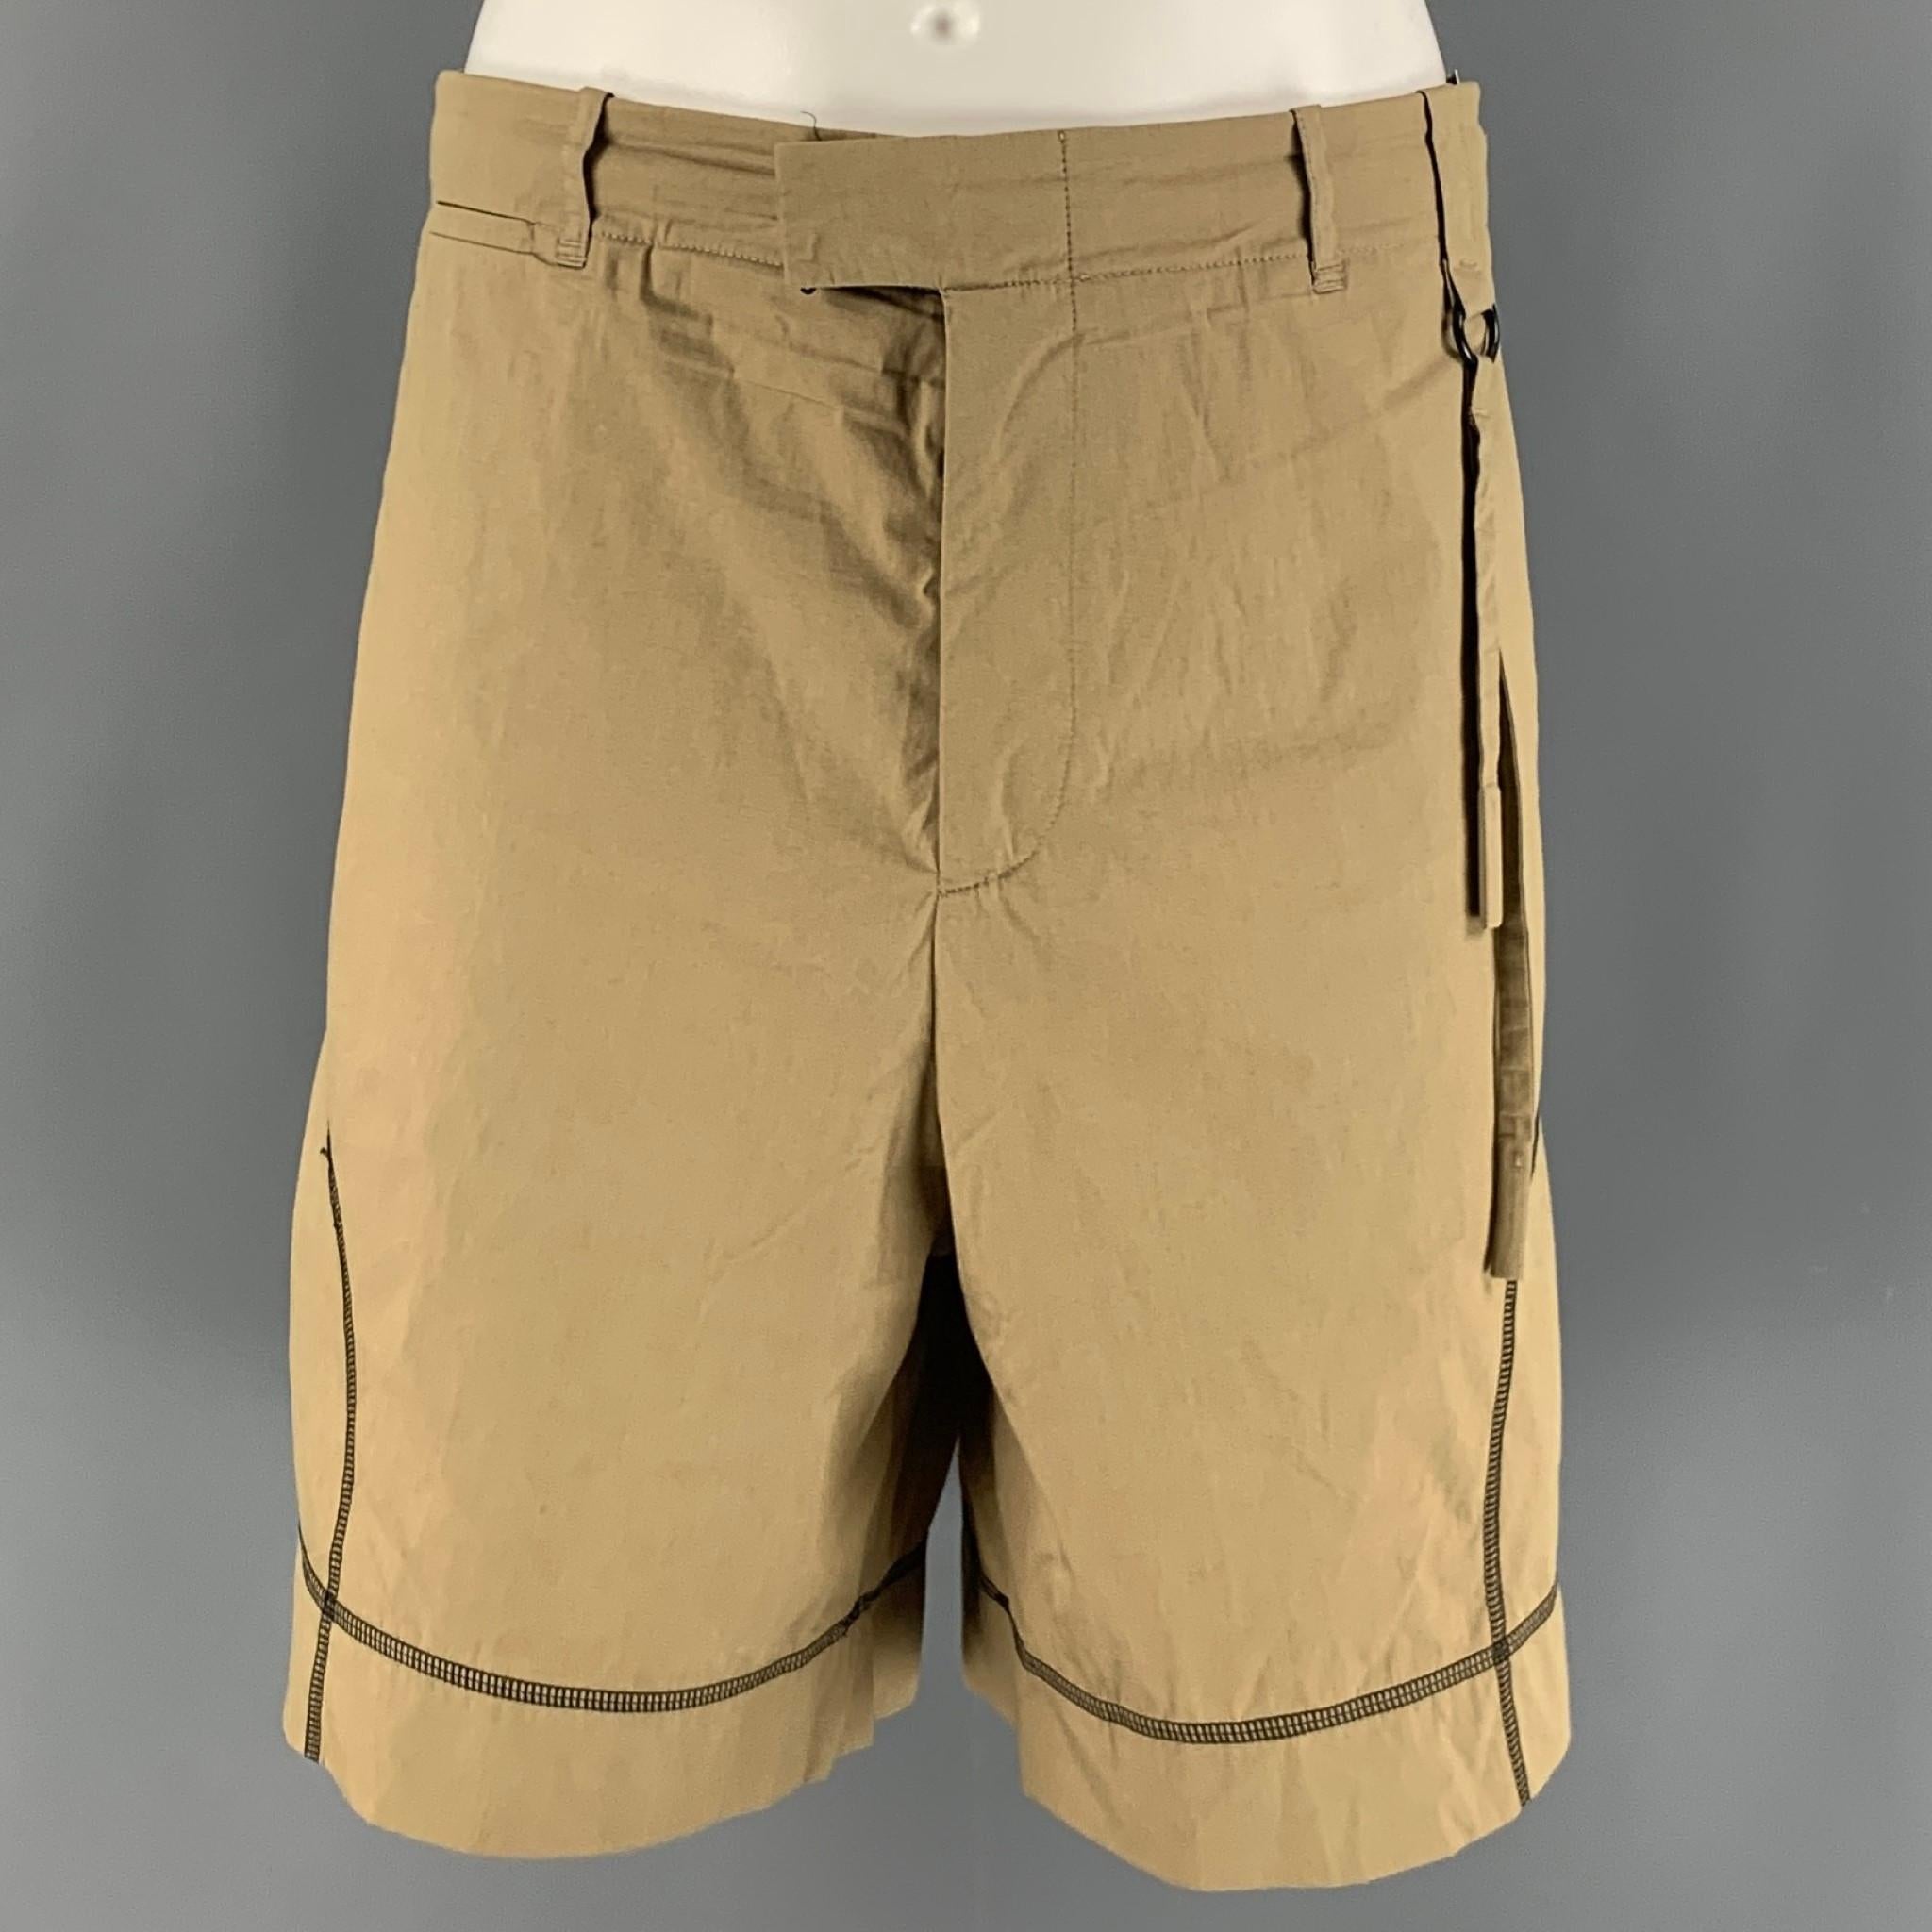 CRAIG GREEN shorts come in a khaki cotton microfiber material with a button tab waistband, contrast stitches, and zipper fly. Made in Italy.

Excellent Pre-Owned Condition.
Marked: L

Measurements:

Waist: 38 in.
Rise: 13 in.
Inseam: 7 in.  

SKU: